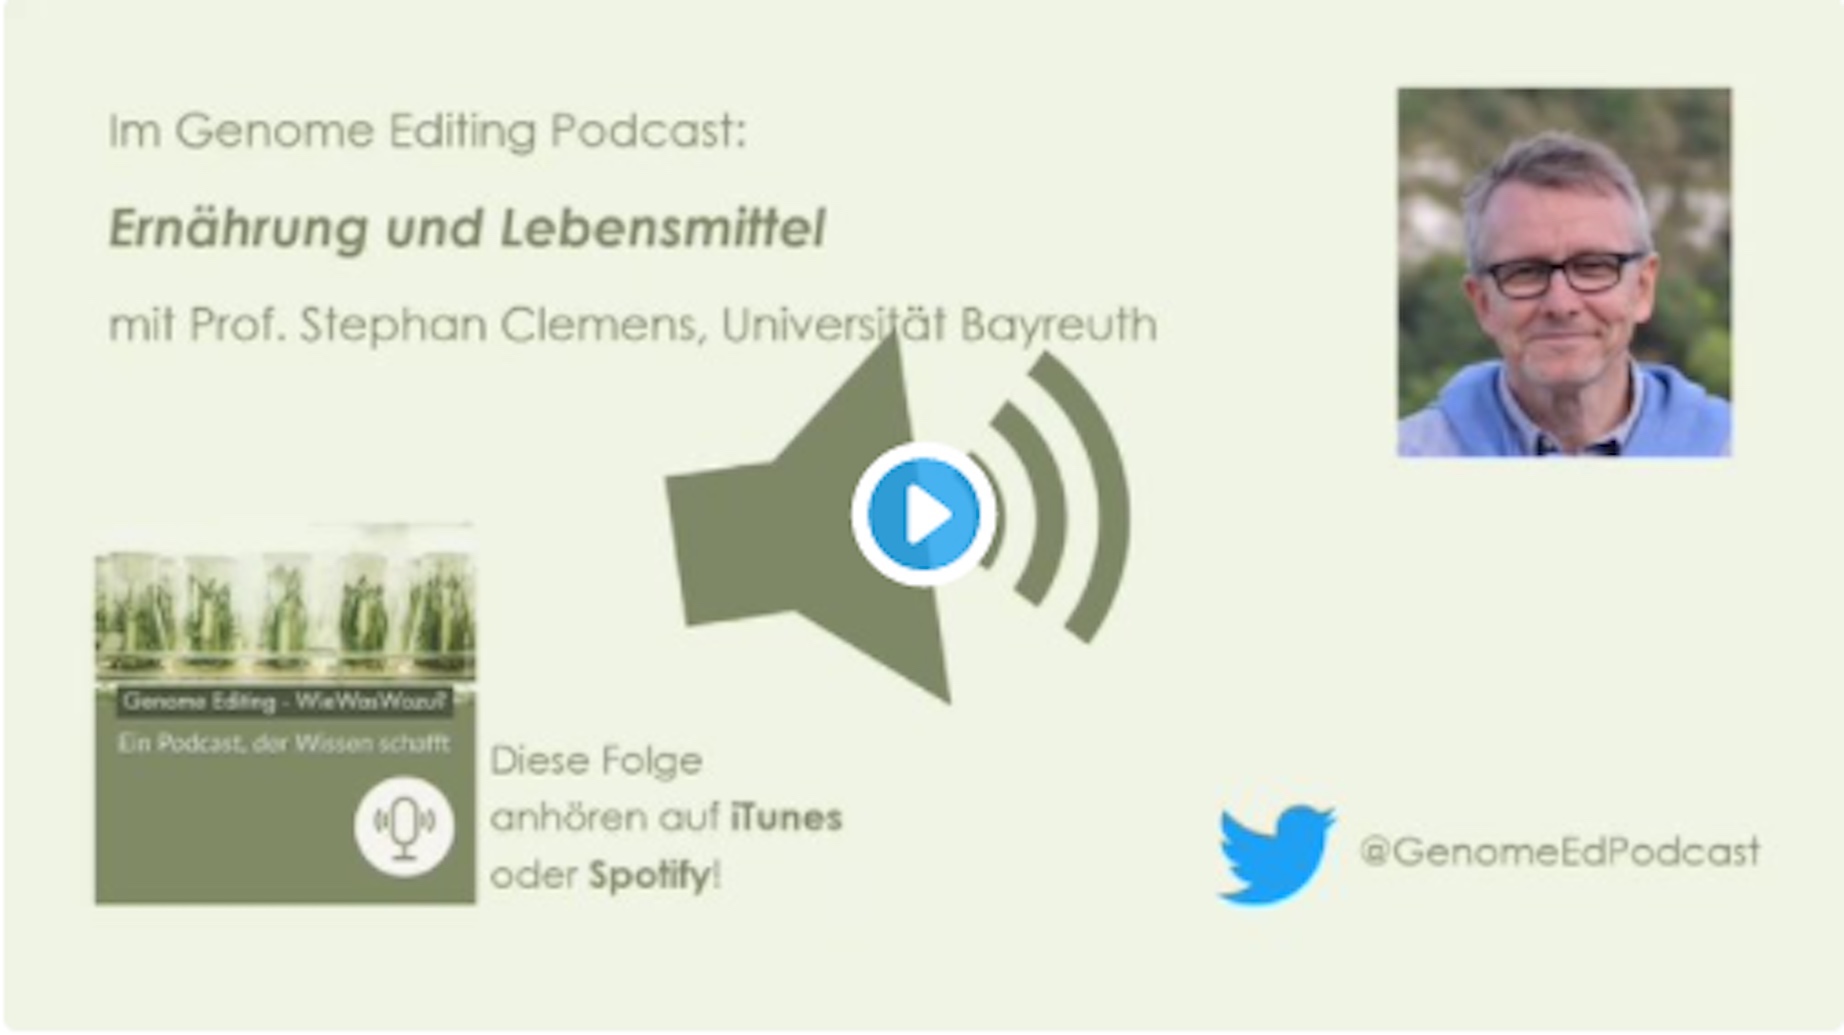 Podcast Genome Editing mit Prof. Clemens